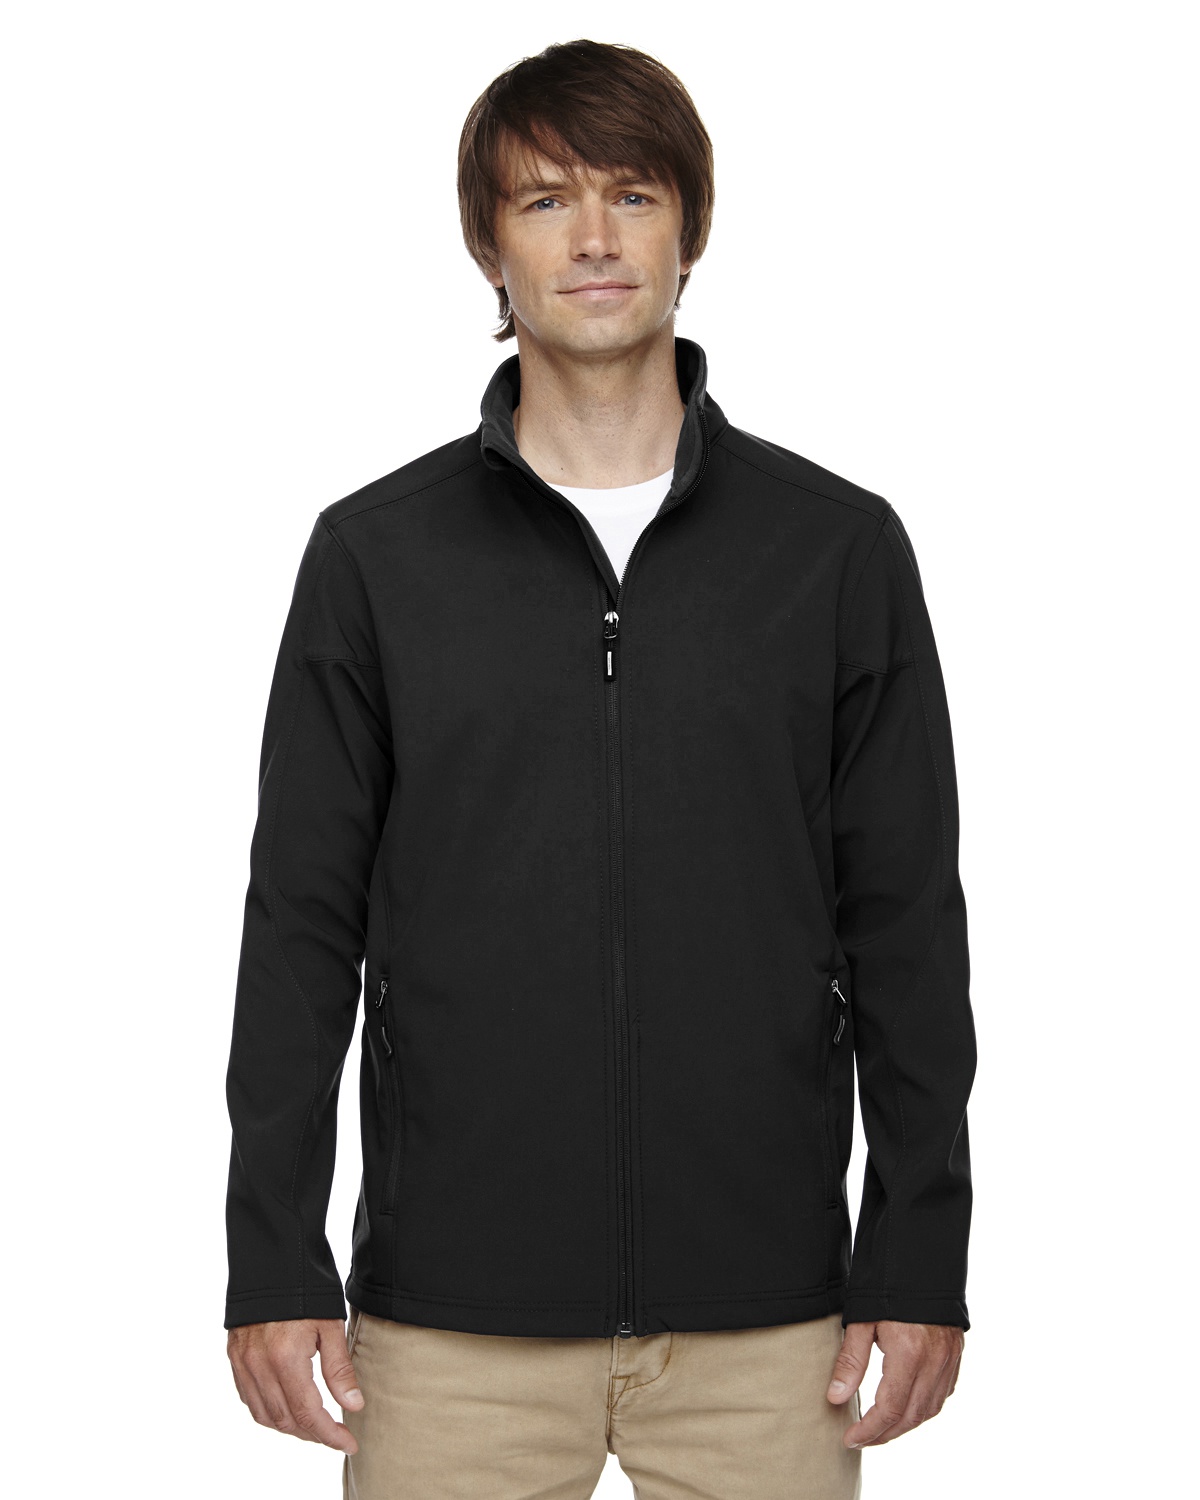 'Ash City - Core 365 88184T Men's Tall Cruise Two-Layer Fleece Bonded Soft Shell Jacket'